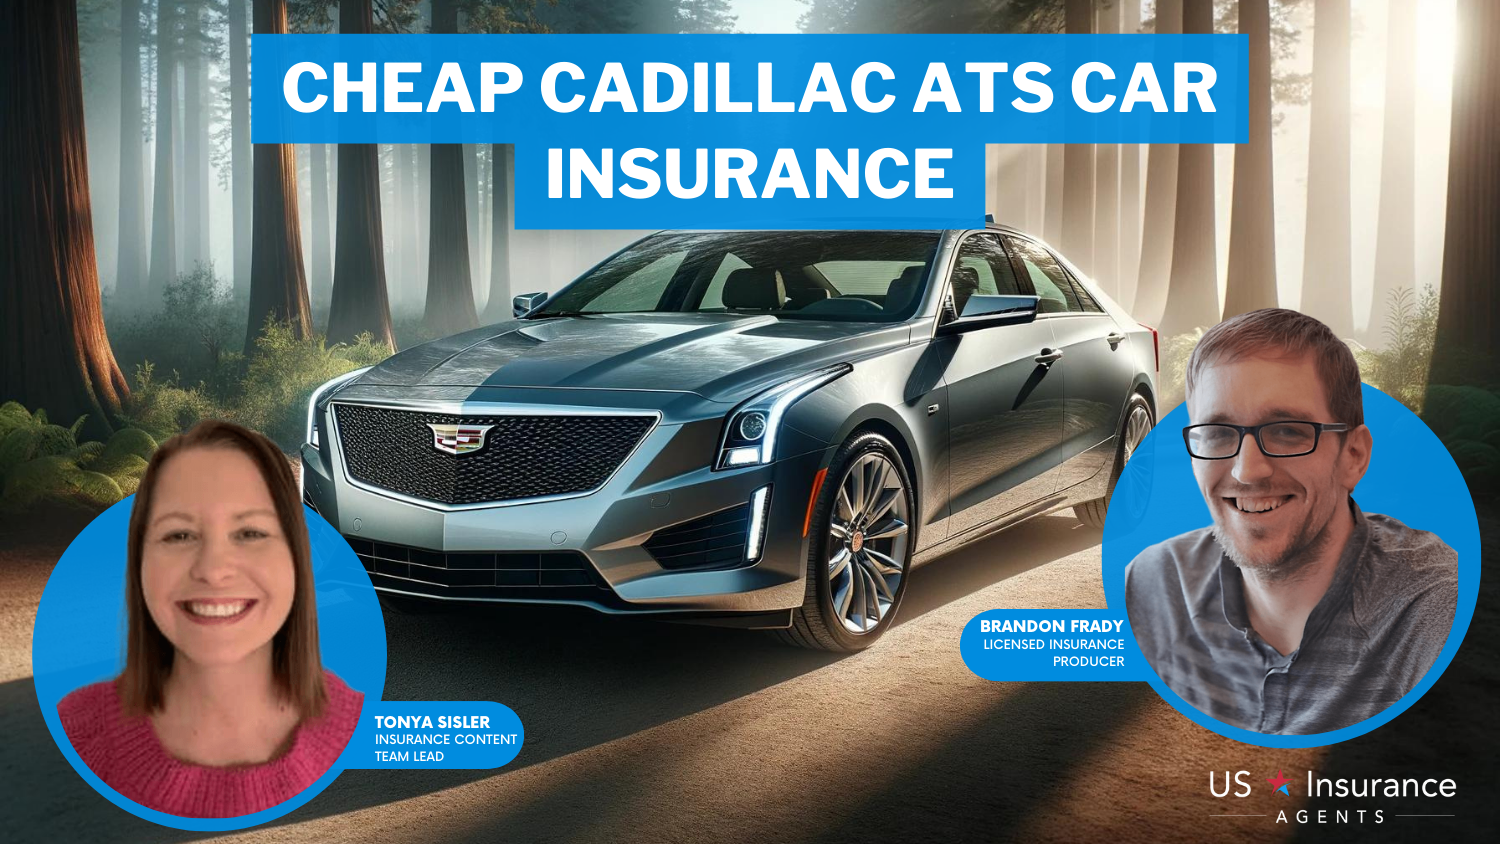 Cheap Cadillac ATS Car Insurance: State Farm, Travelers, and Nationwide